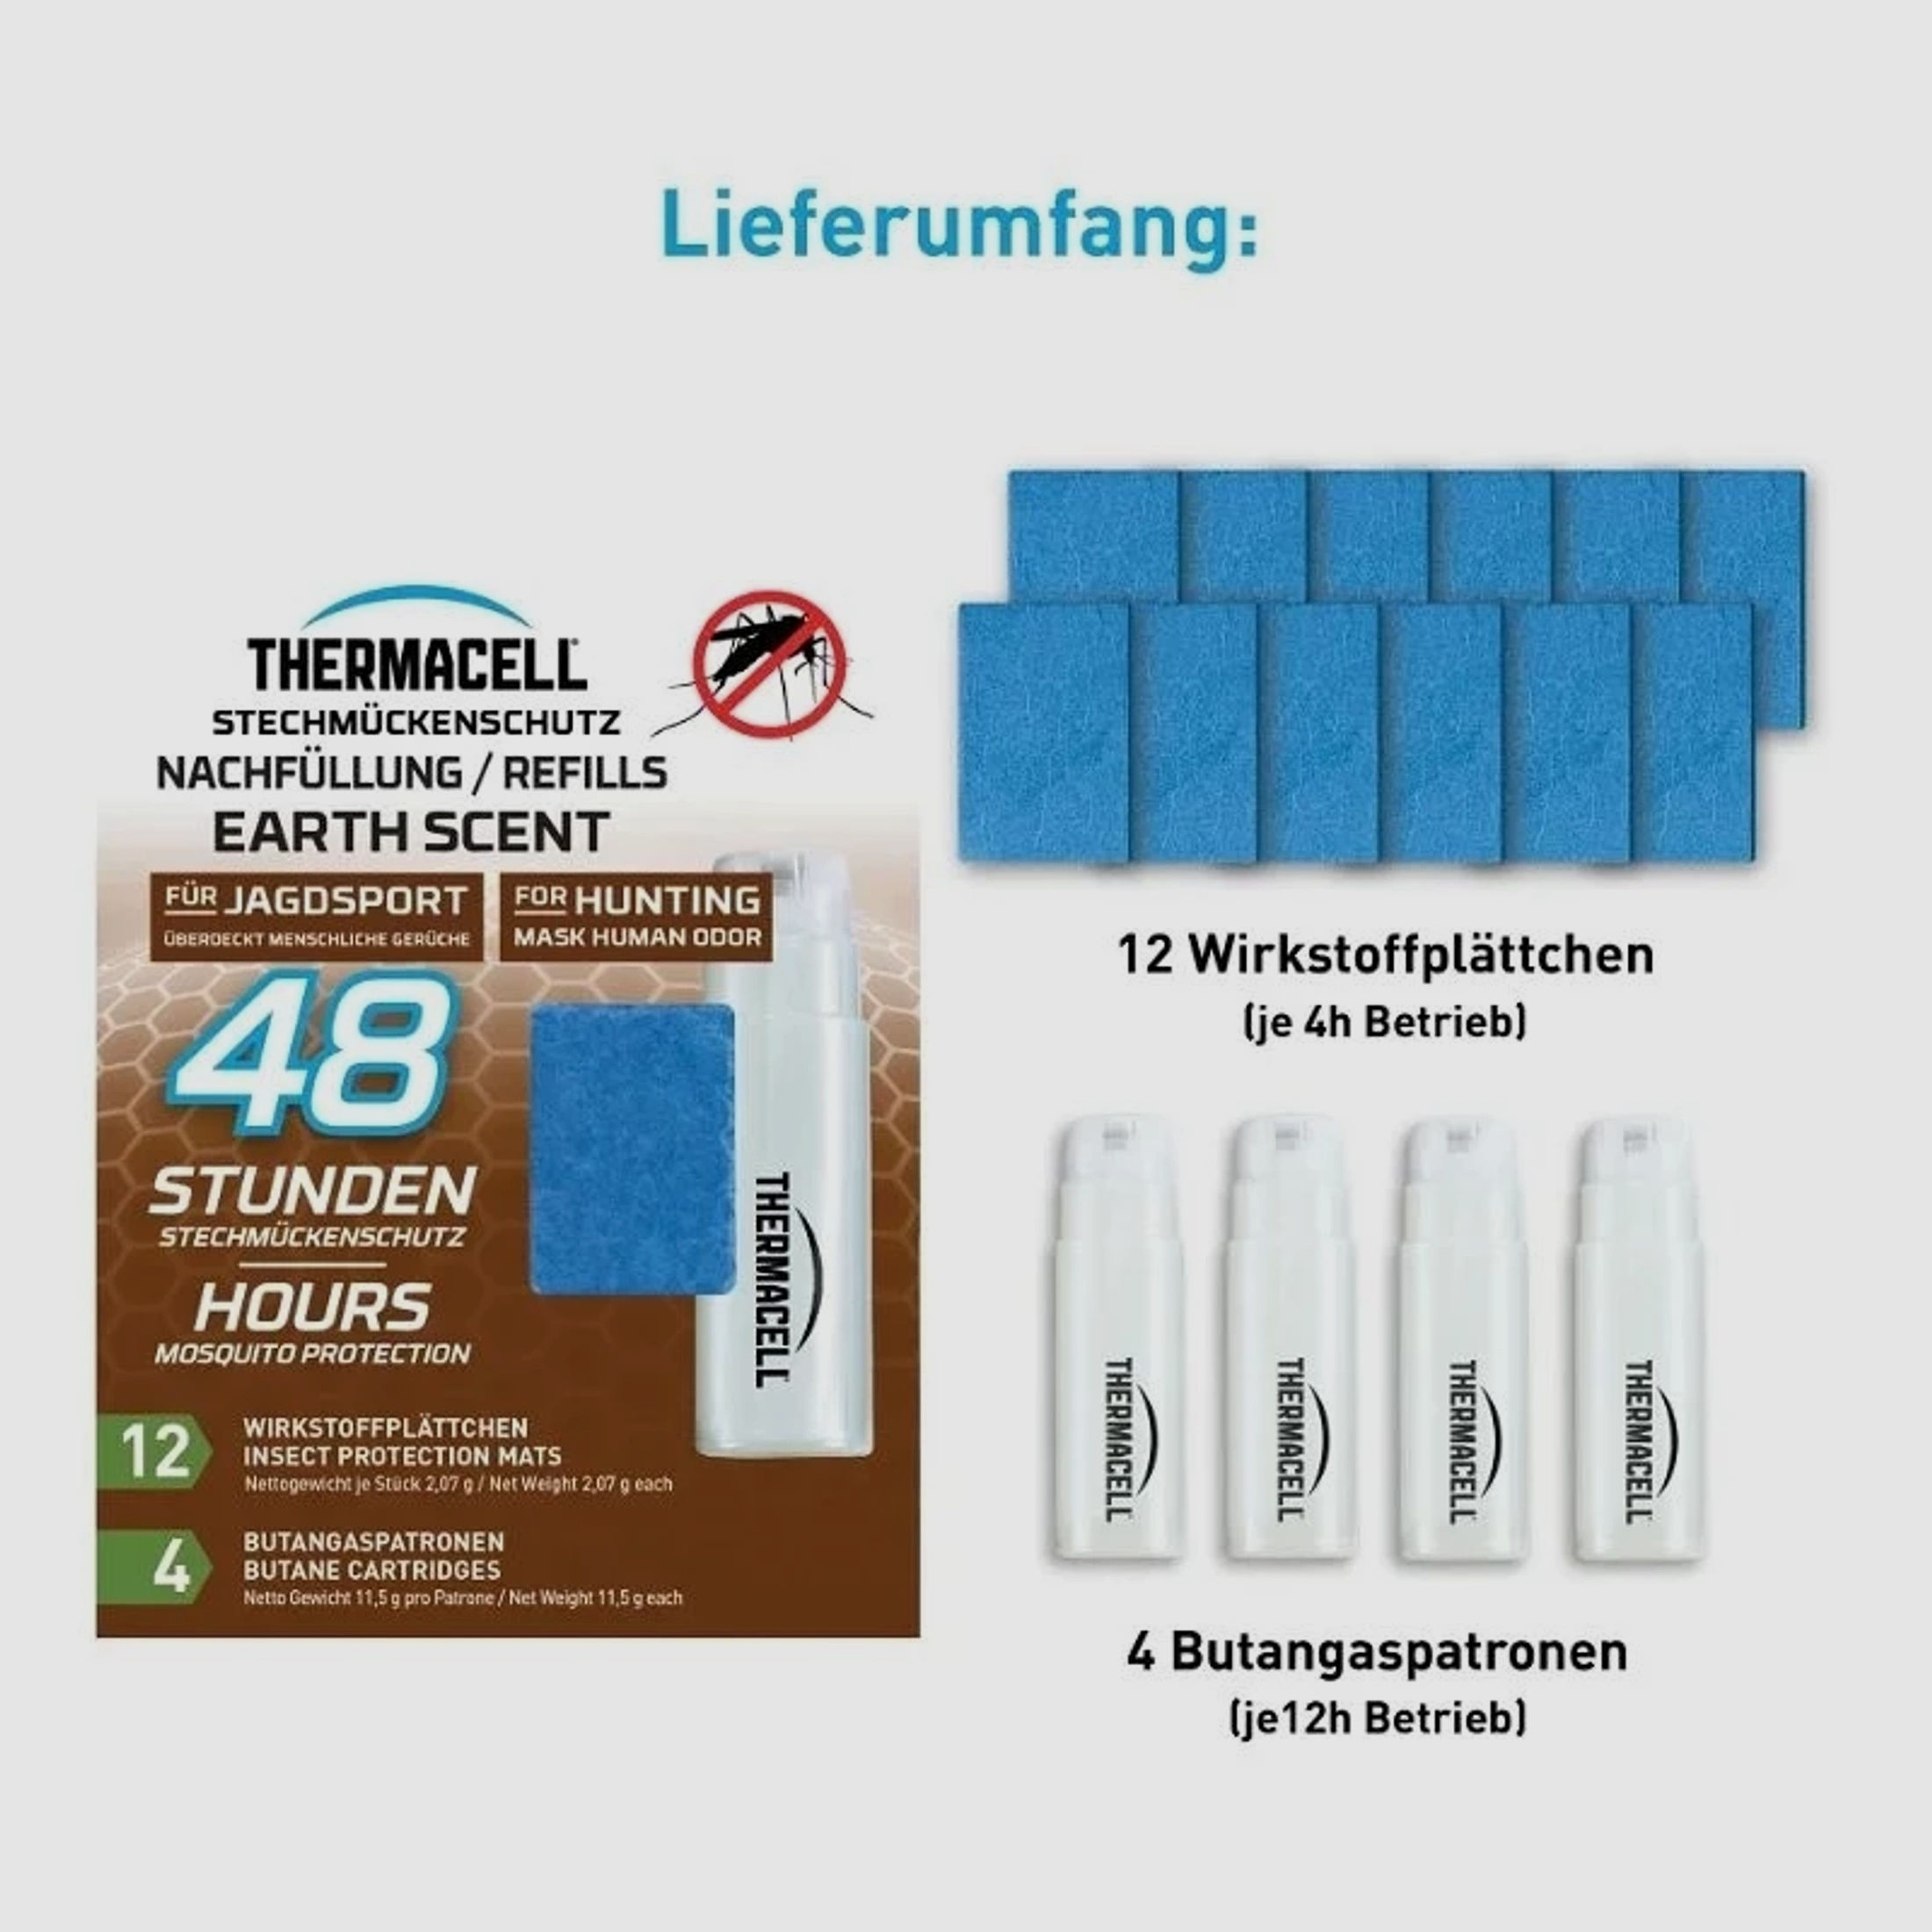 Thermacell E-4 Earth Scent Nachfüllpackung 48 Stunden